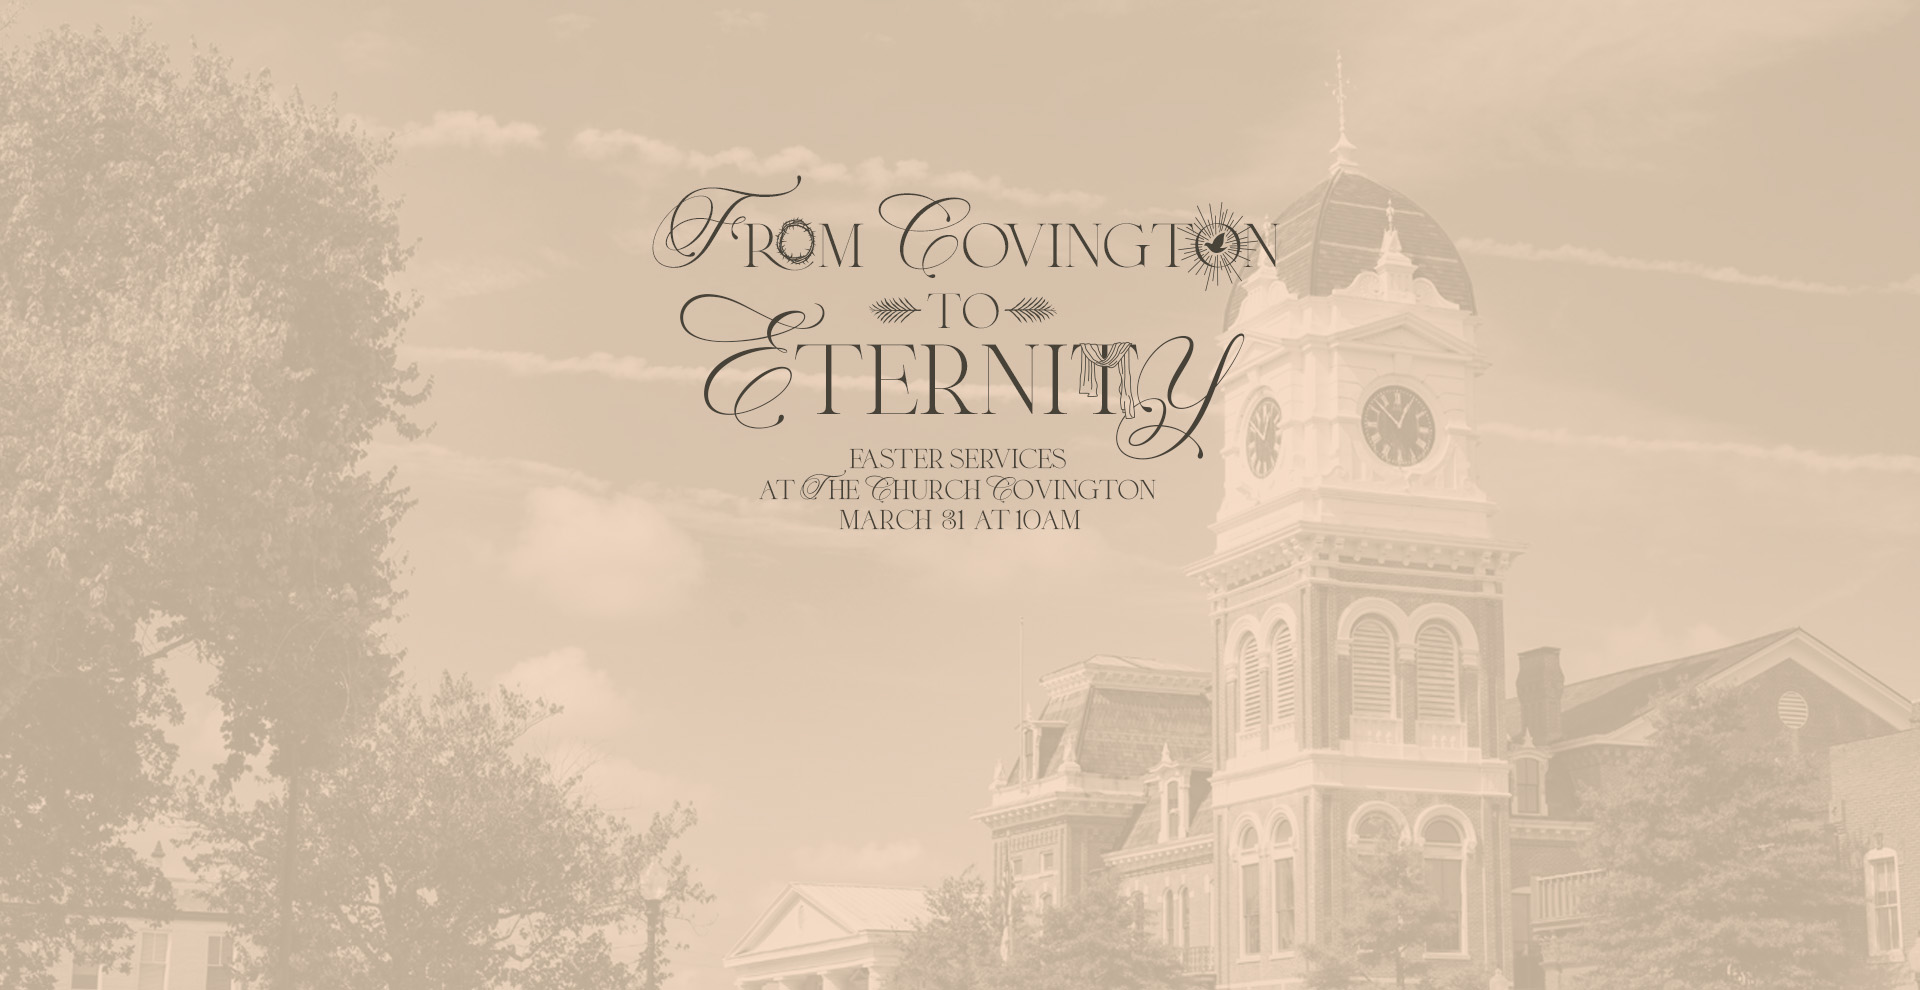 Series: From Covington to Eternity